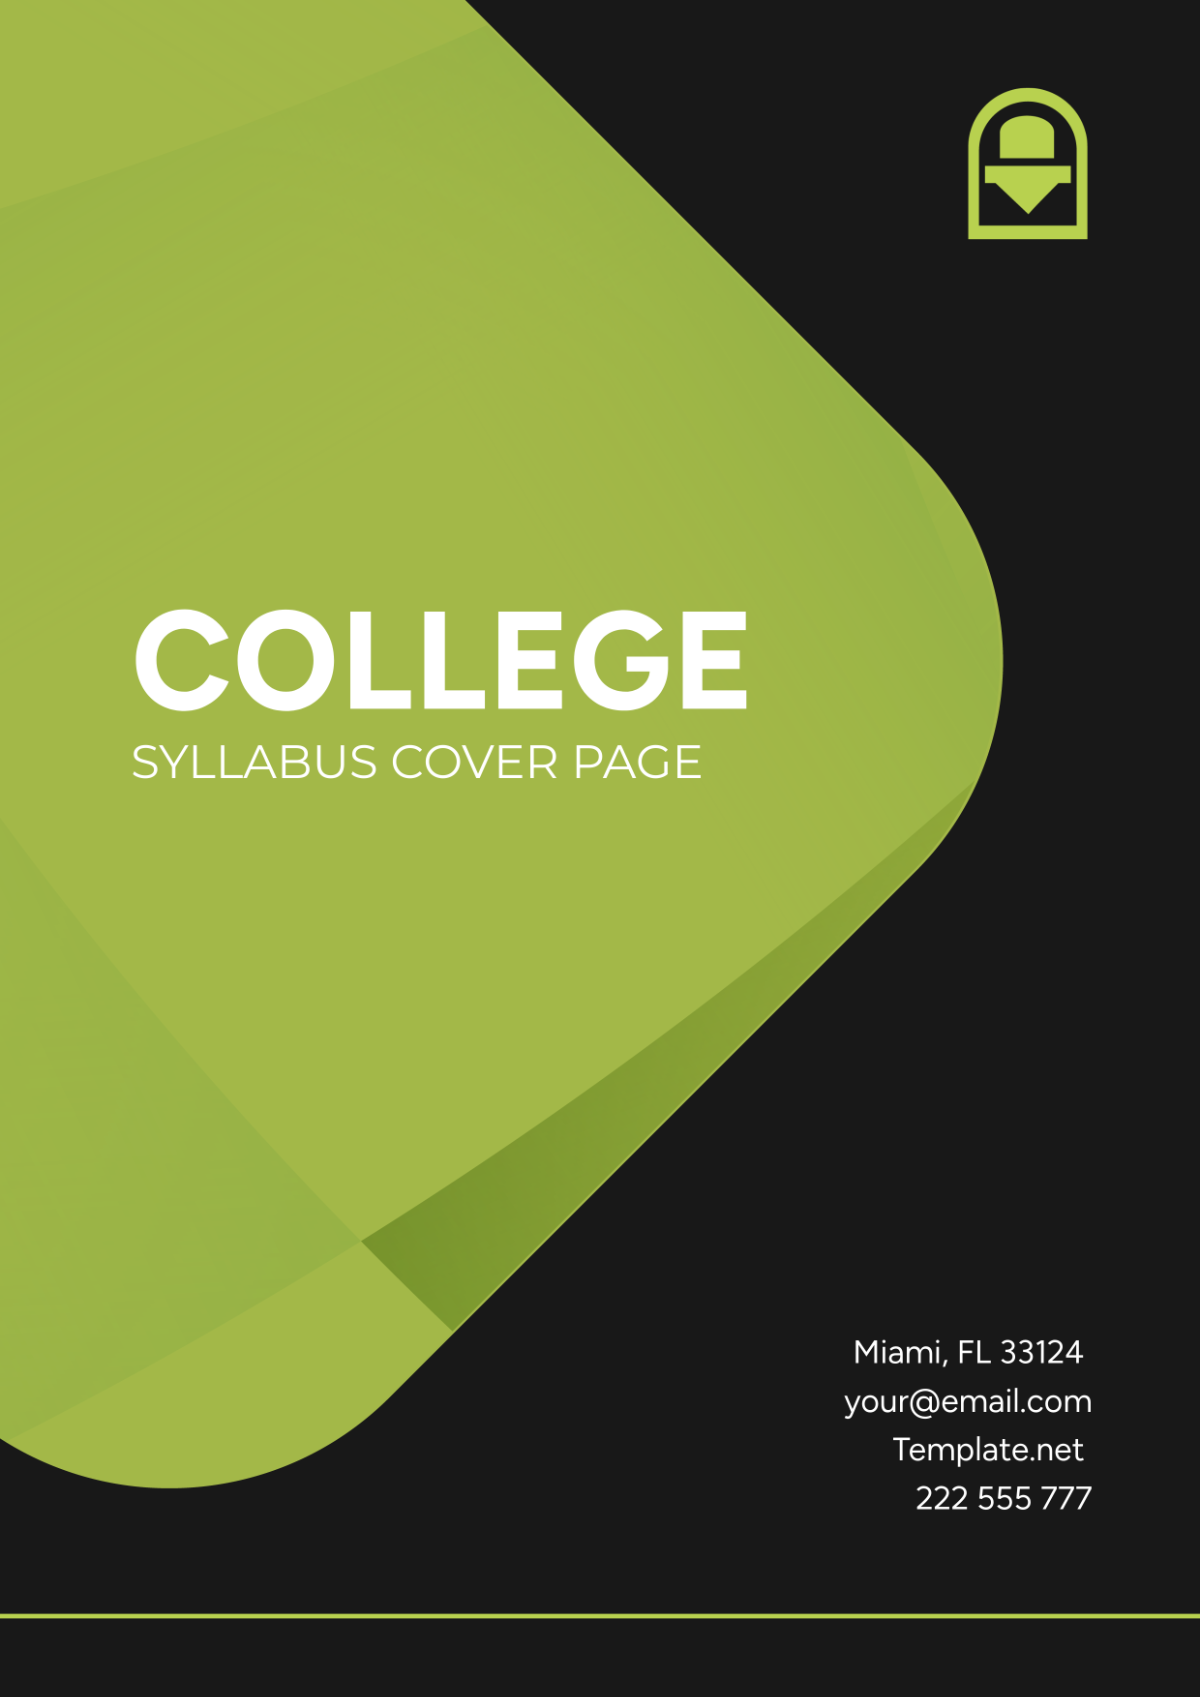 College Syllabus Cover Page Template